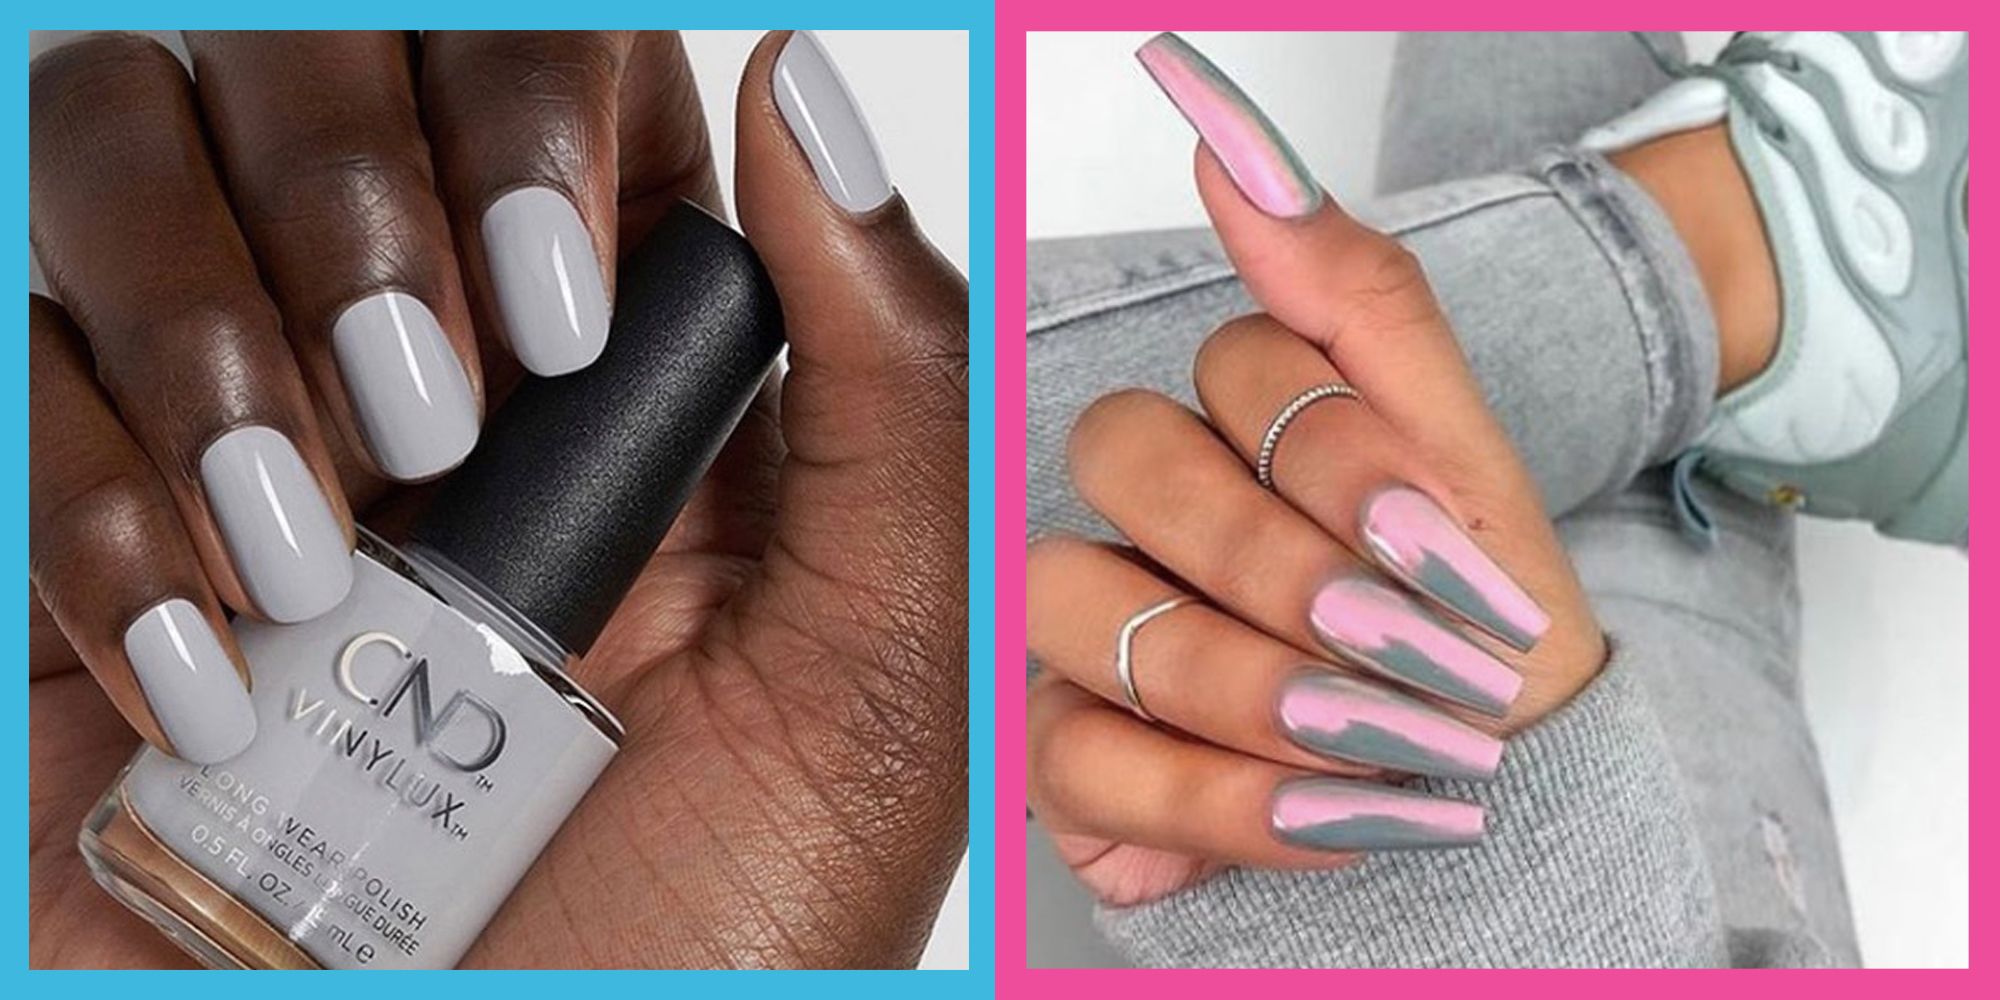 3. Grey and White Geometric Nails - wide 7